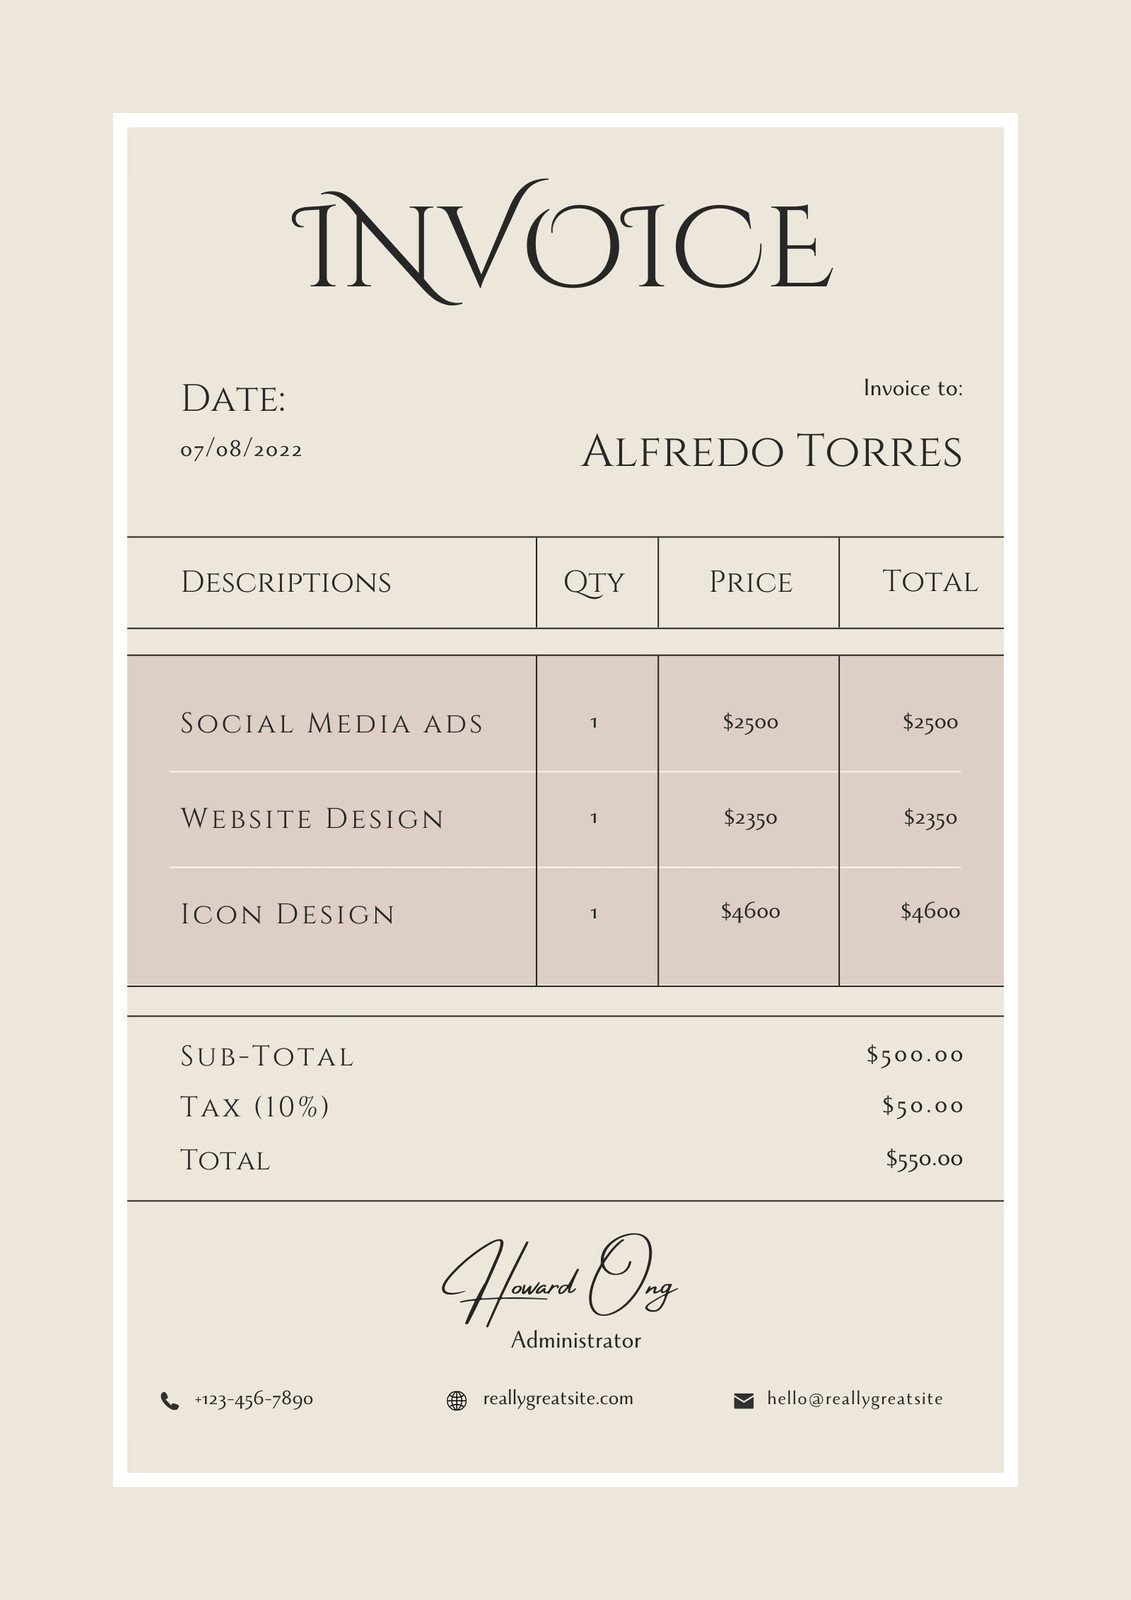 Page 10 - Free, printable, professional invoice templates to customize |  Canva